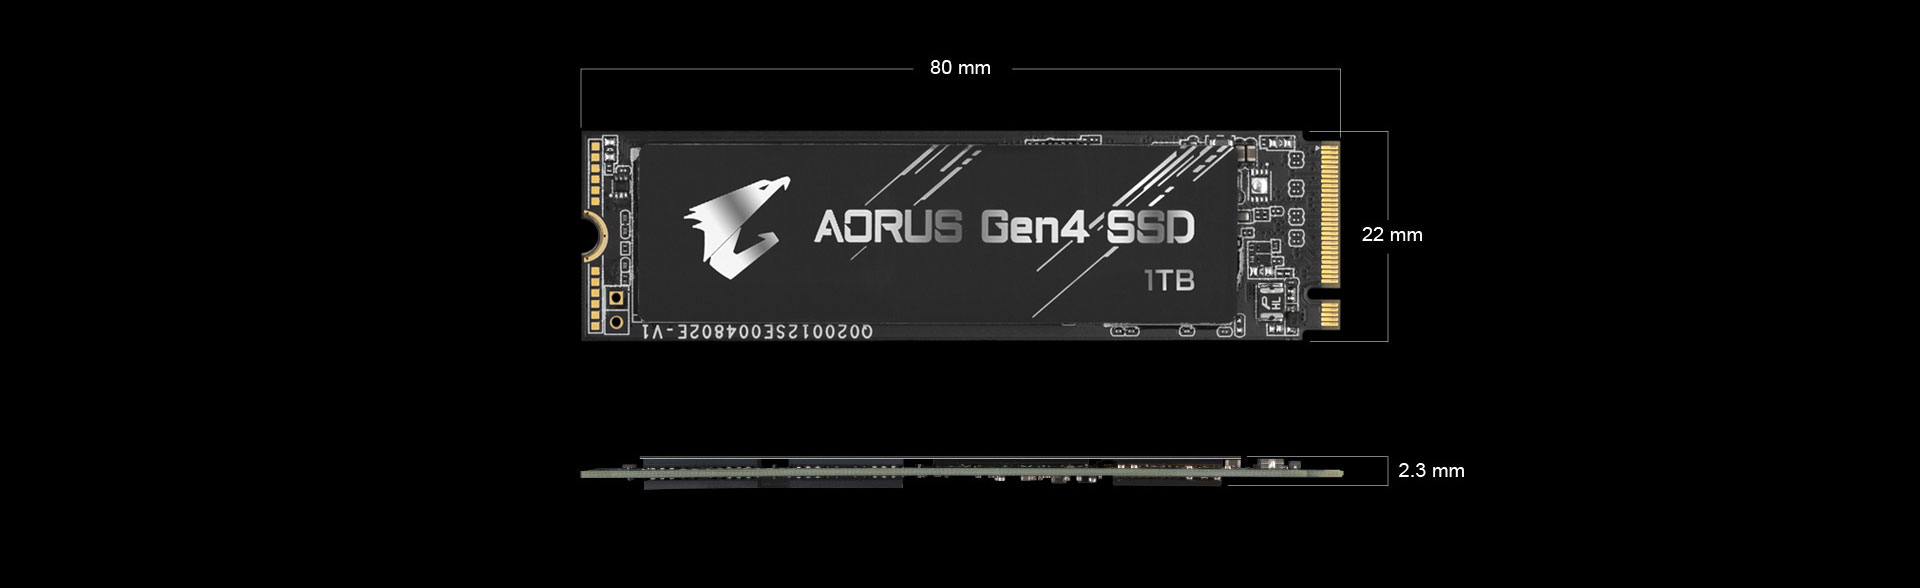 AORUS Gen4 SSD 1TB Key Features | Solid State Drive (SSD 